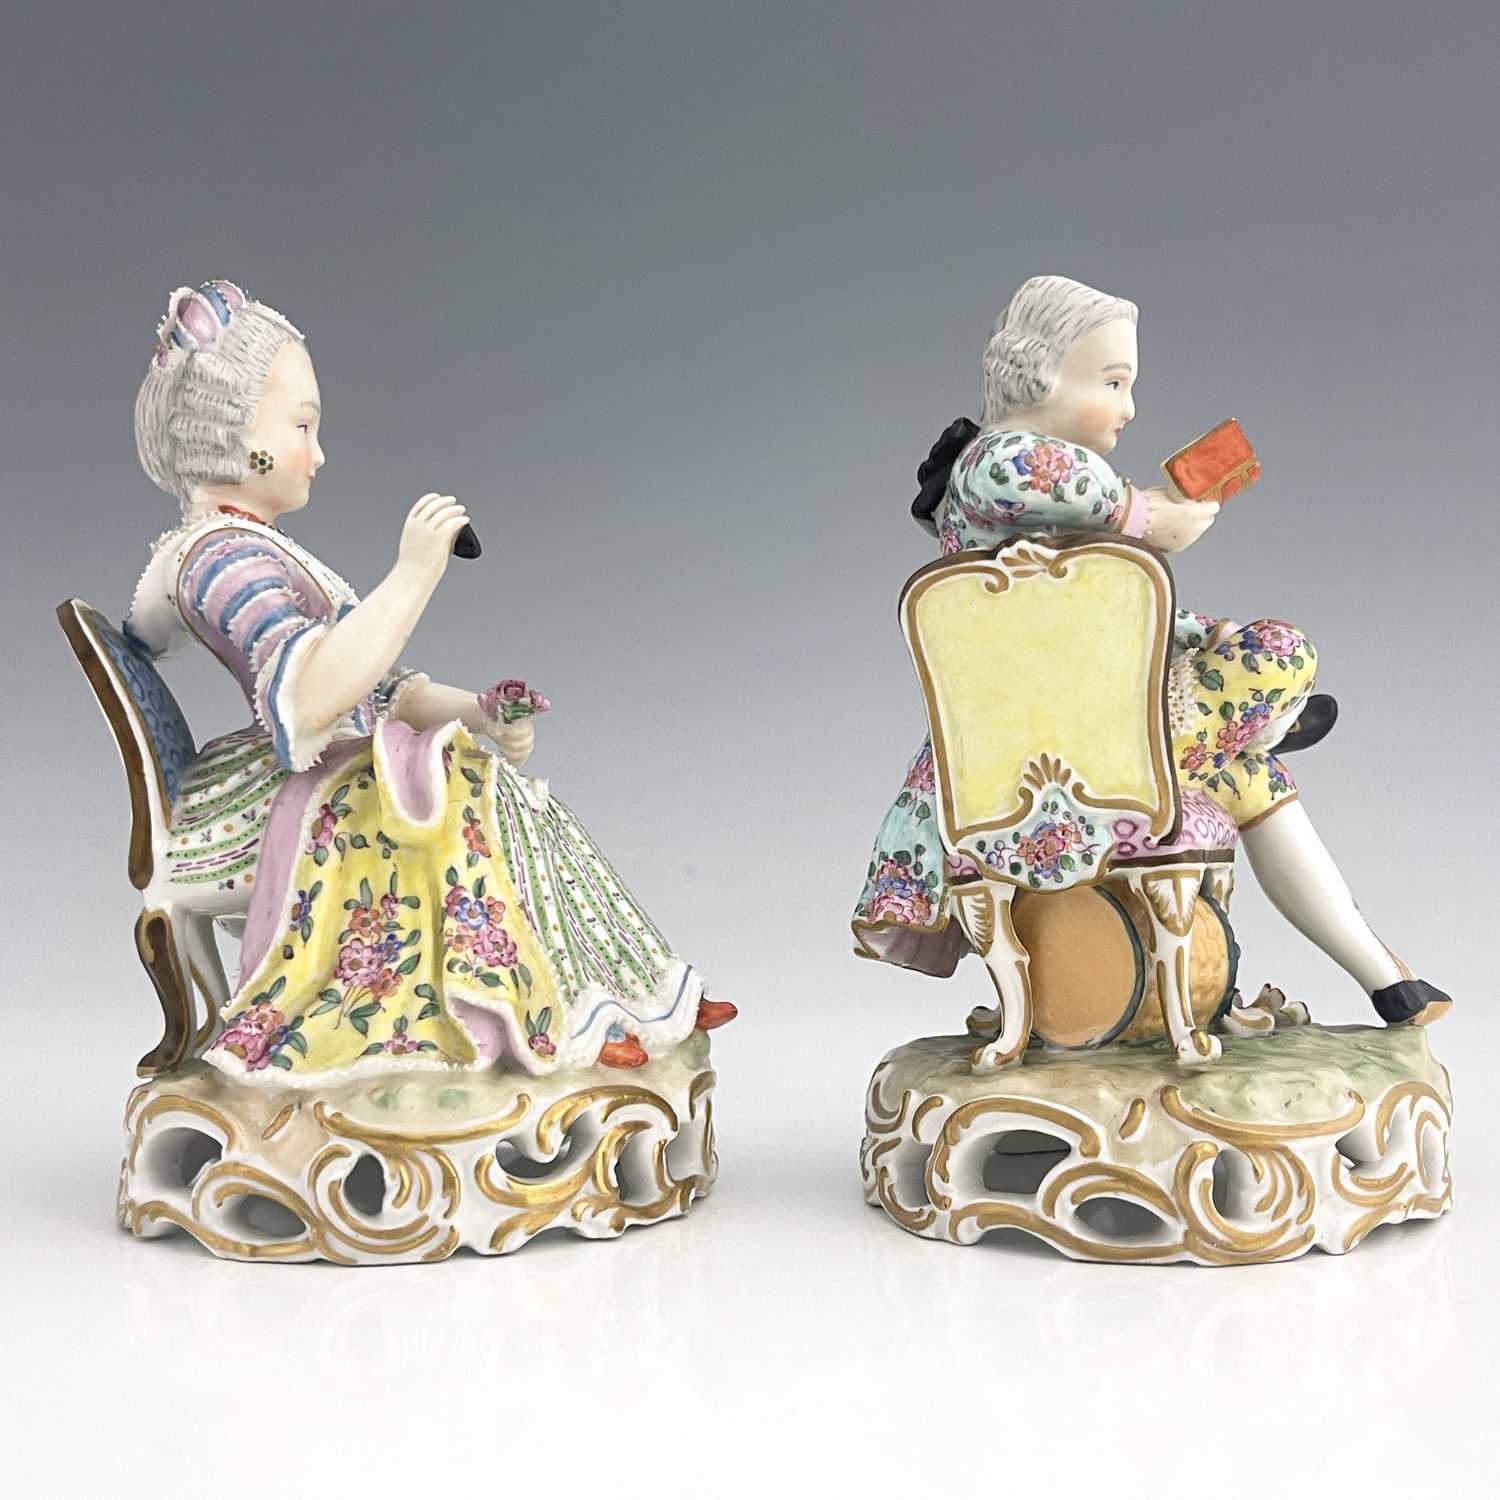 A pair of Meissen type figures, probably late 18th century, model 137, modelled as a seated woman - Image 5 of 6